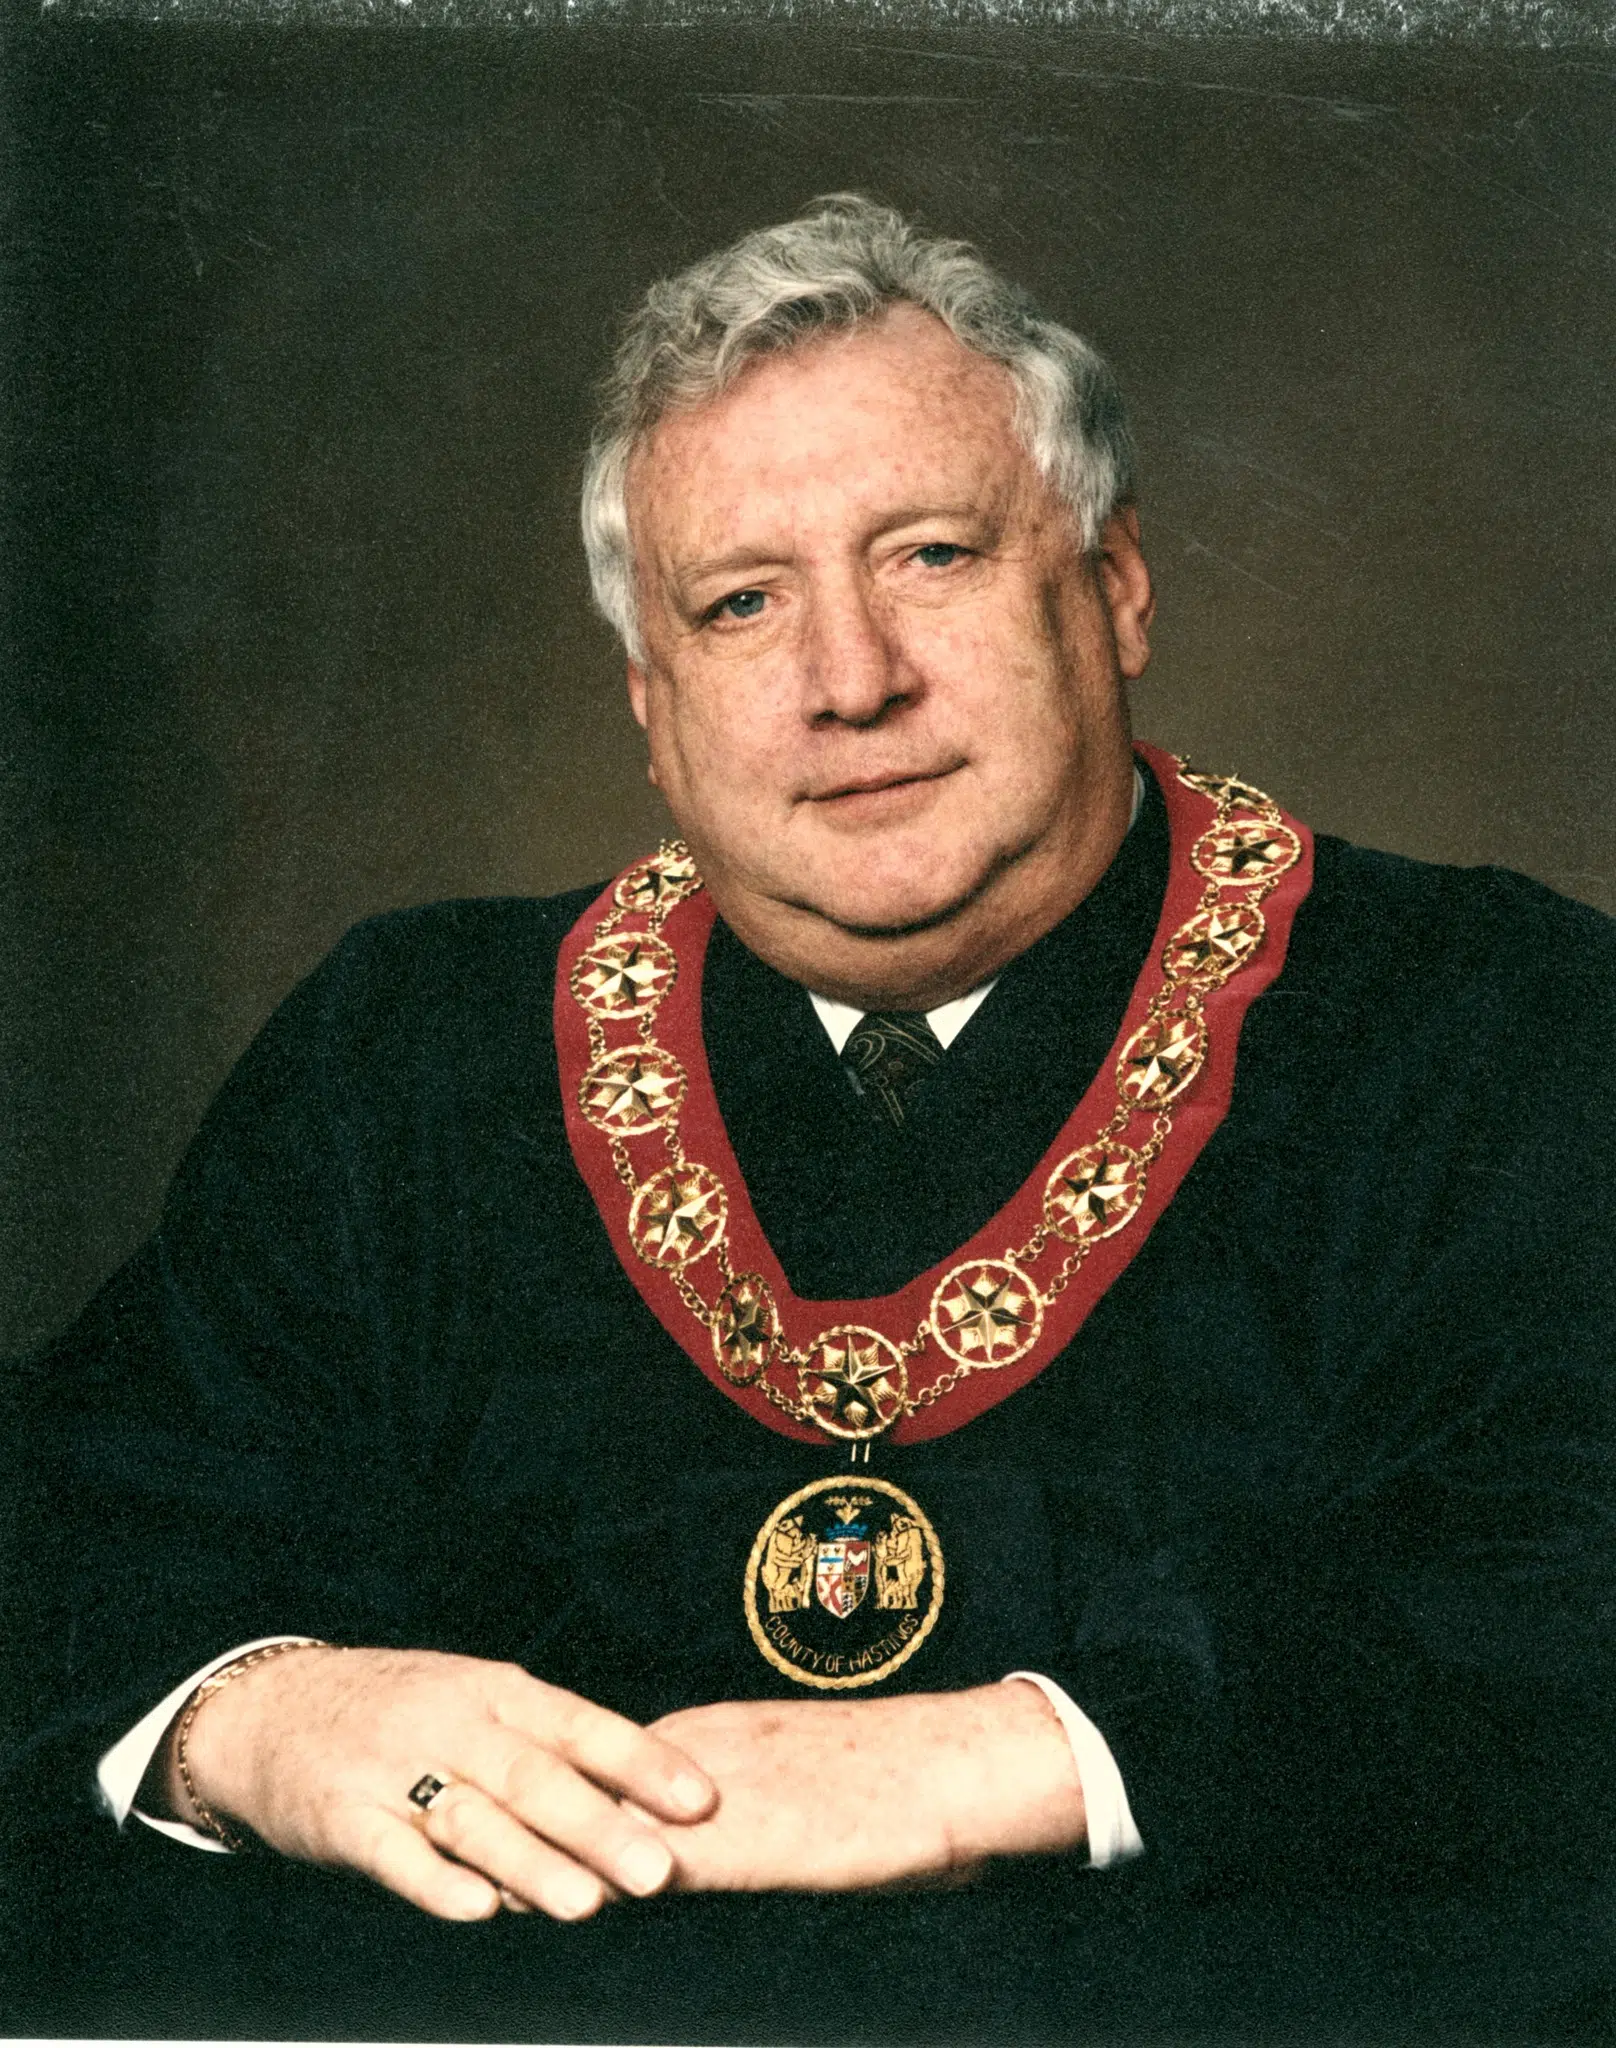 Former Mayor of Bancroft, Hastings County Warden passes away